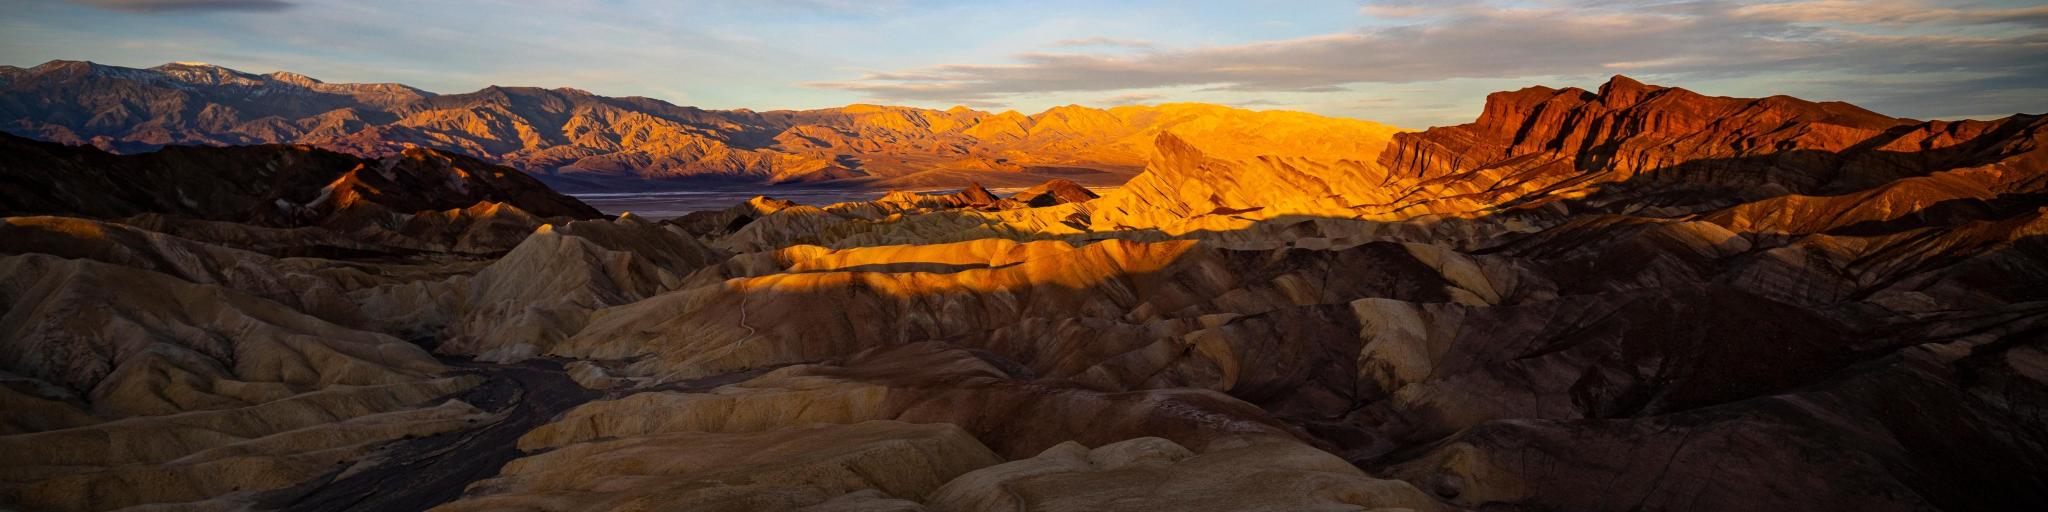 Sunrise in zabriskie point, Zabriskie Point, Death Valley National Park, with different colored mountains dotted across the desert